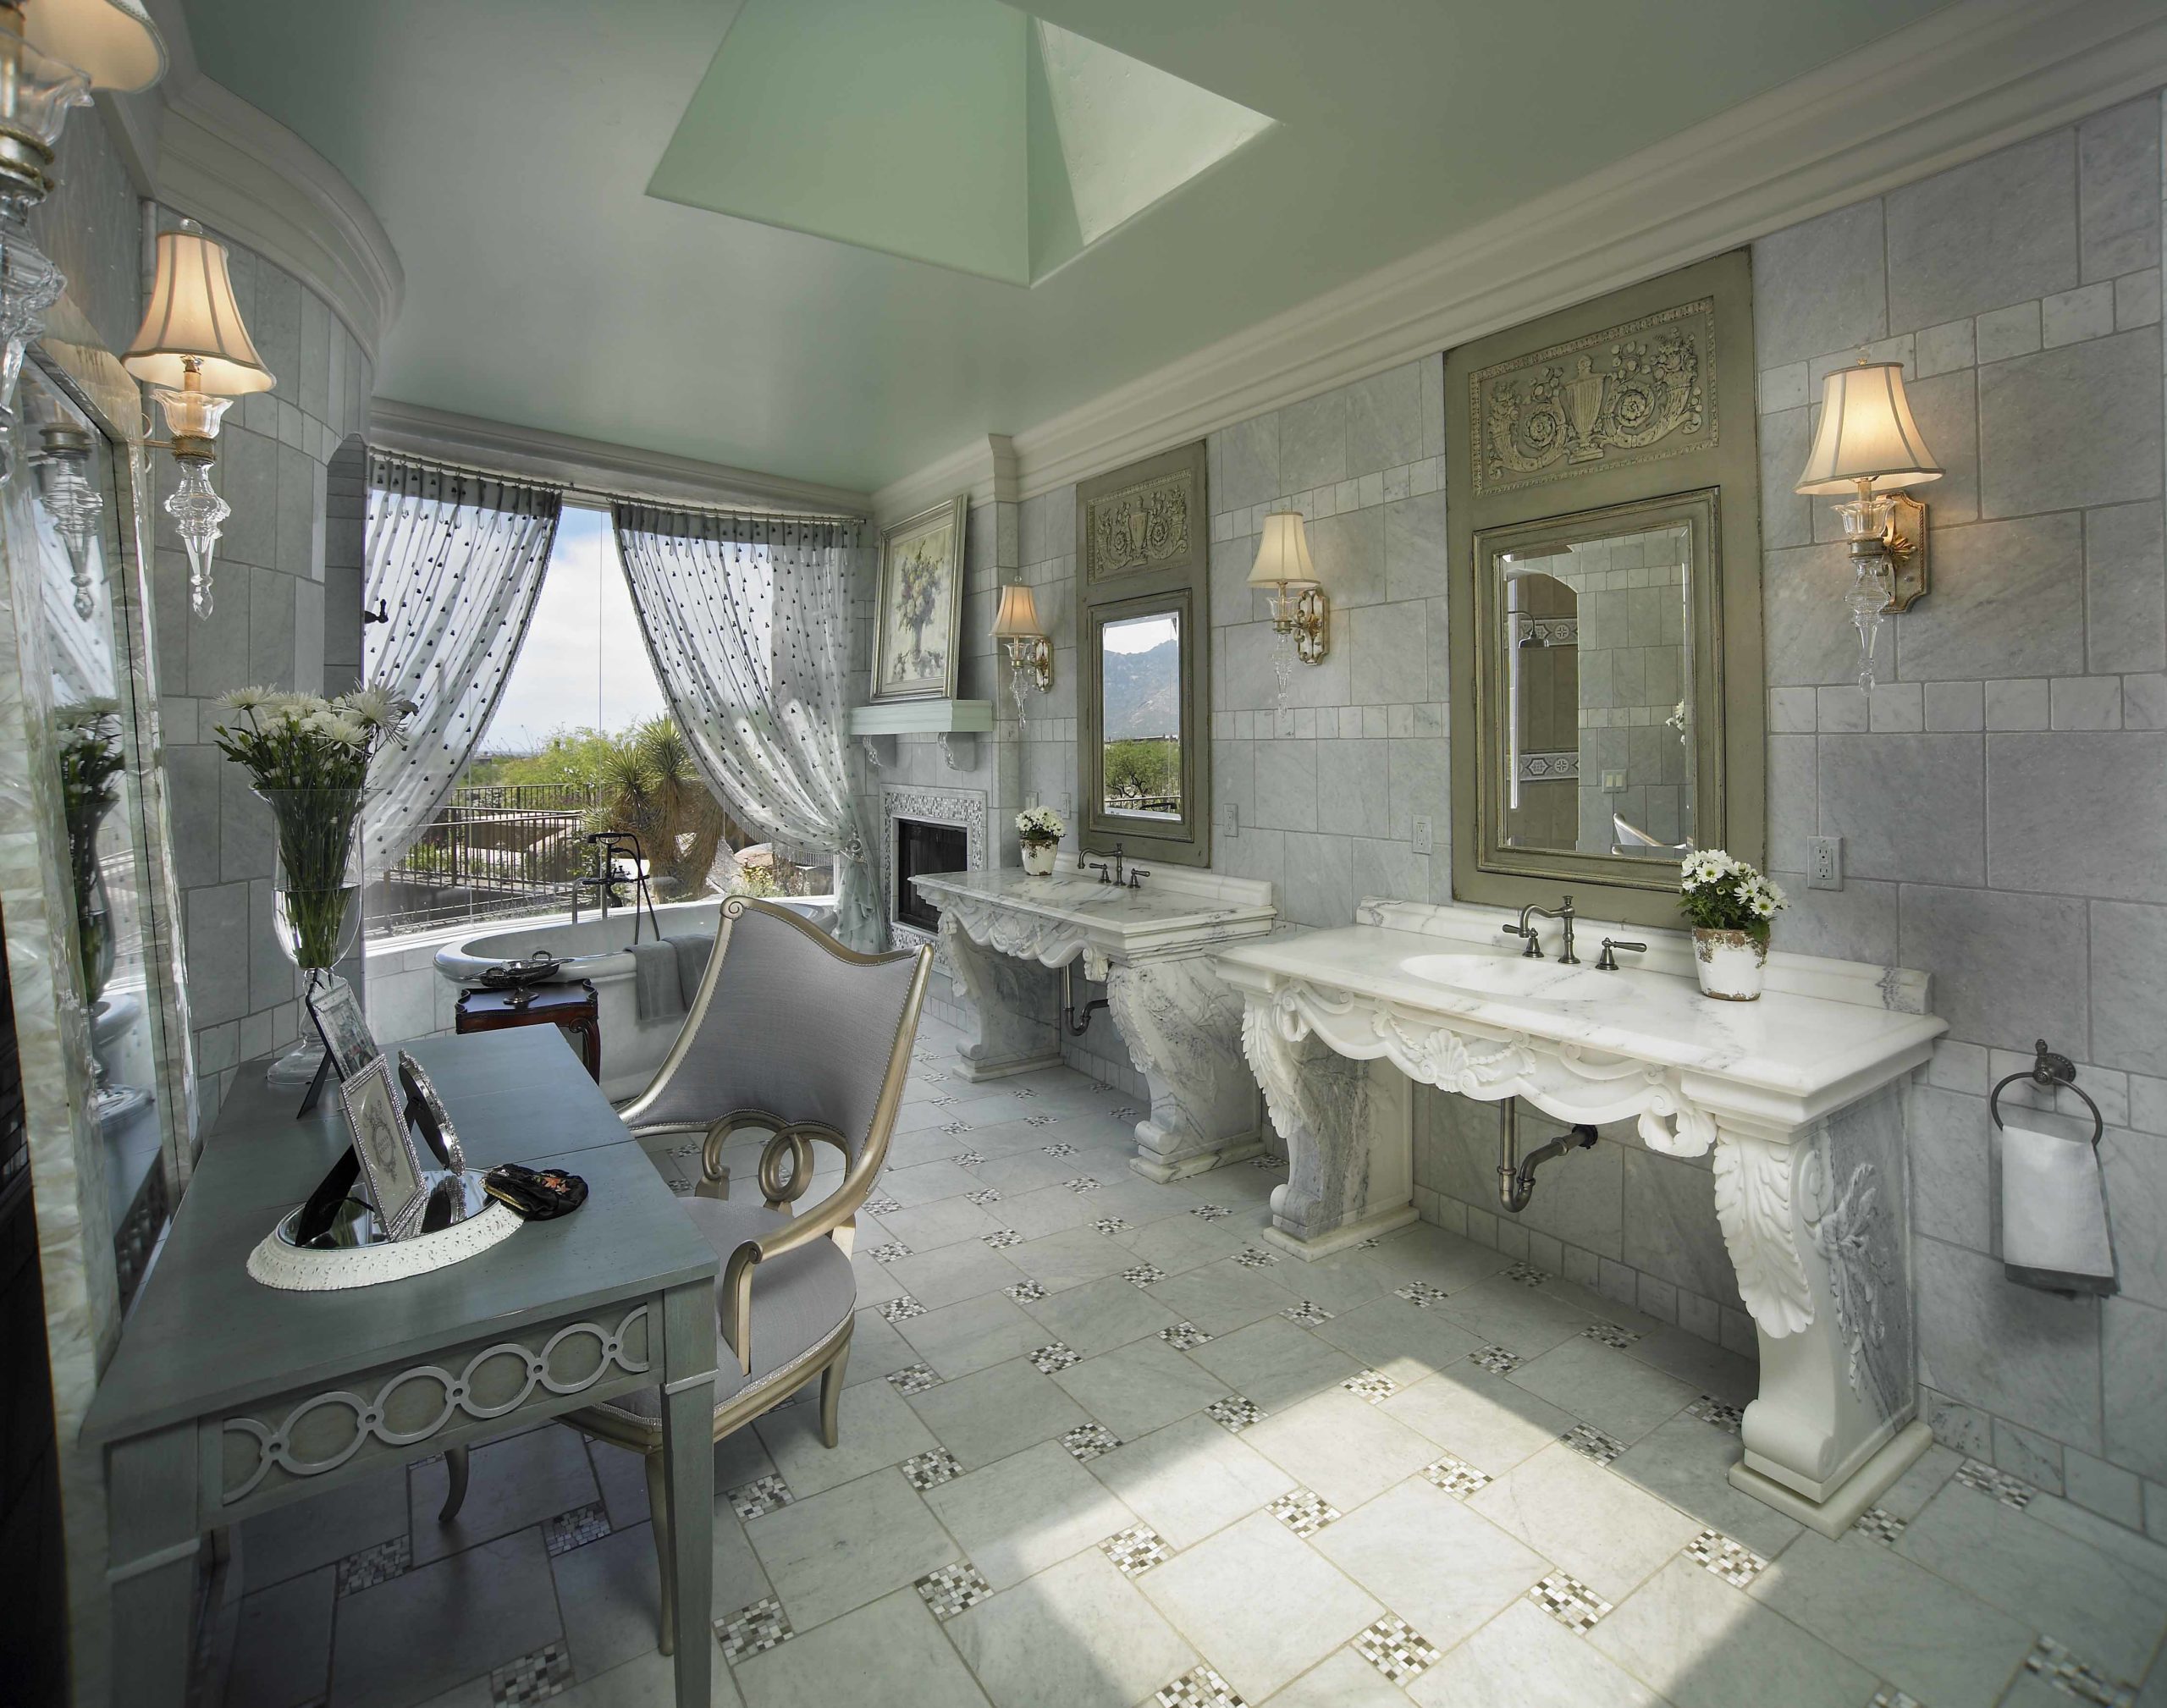 Bathroom with grey tiles on the floor and walls and white marble vanities